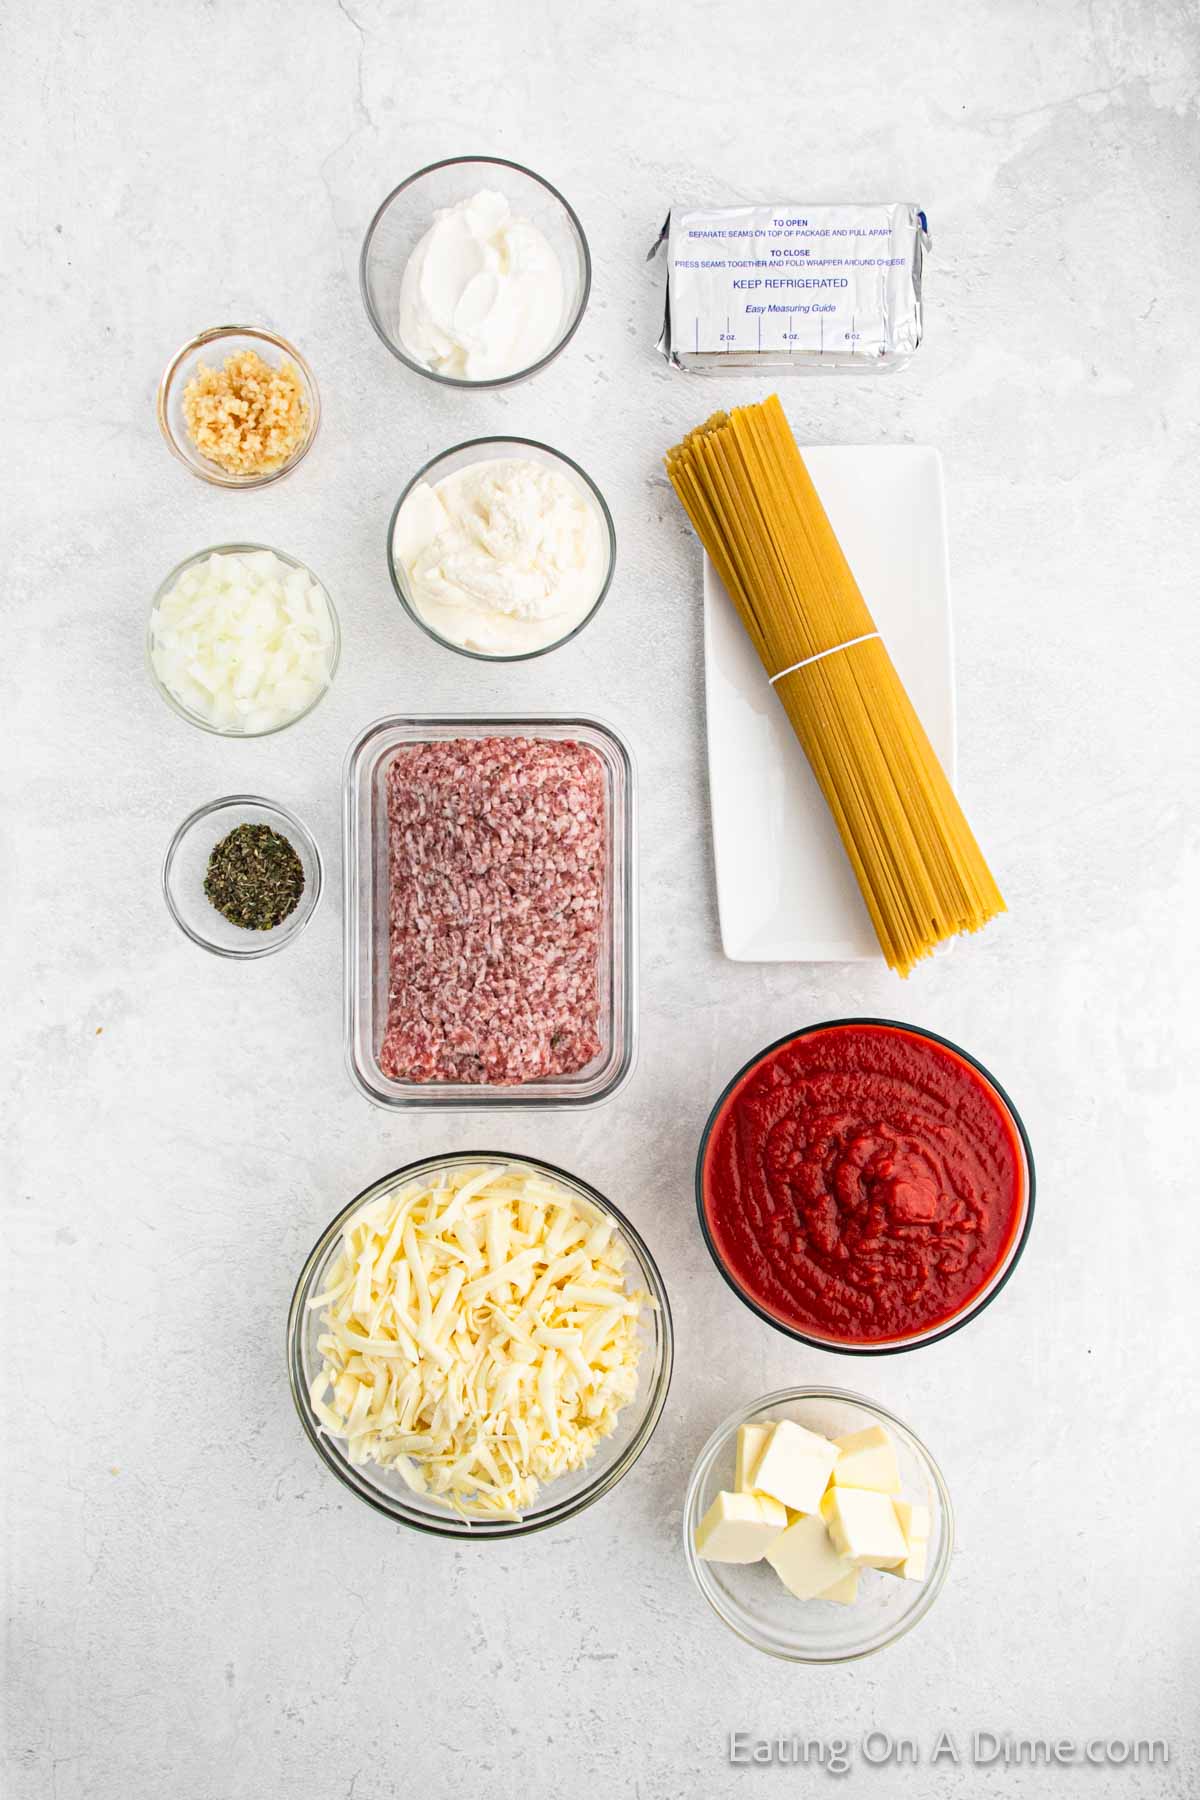 An arrangement of ingredients for a million dollar spaghetti recipe on a white countertop. Items include ground meat, shredded cheese, tomato sauce, spaghetti, butter, minced garlic, sour cream, ricotta cheese, chopped onions, and dried herbs.